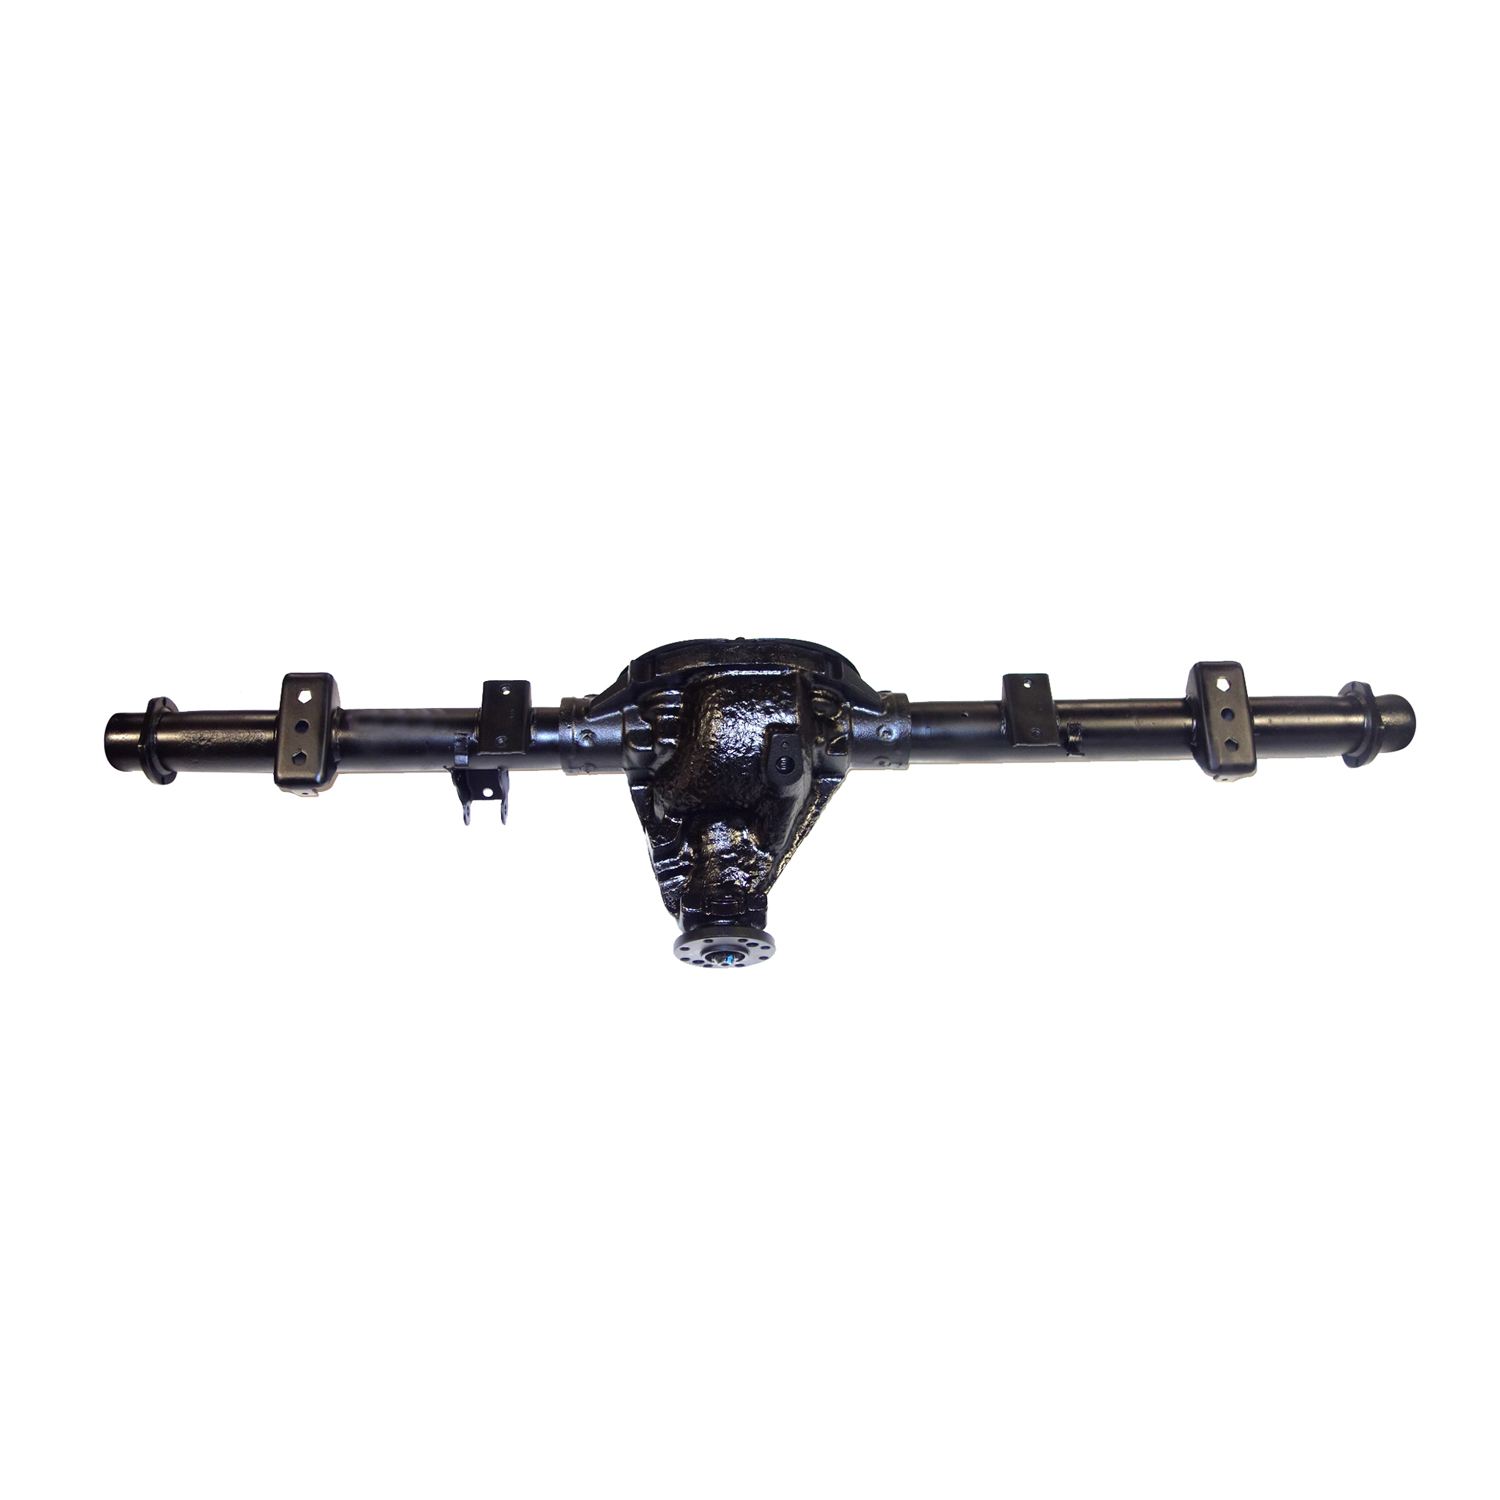 Remanufactured Axle Assy Chy 8.25" 04-05 Durango 3.55 , 4x4 w/ Traction Control, Posi LSD